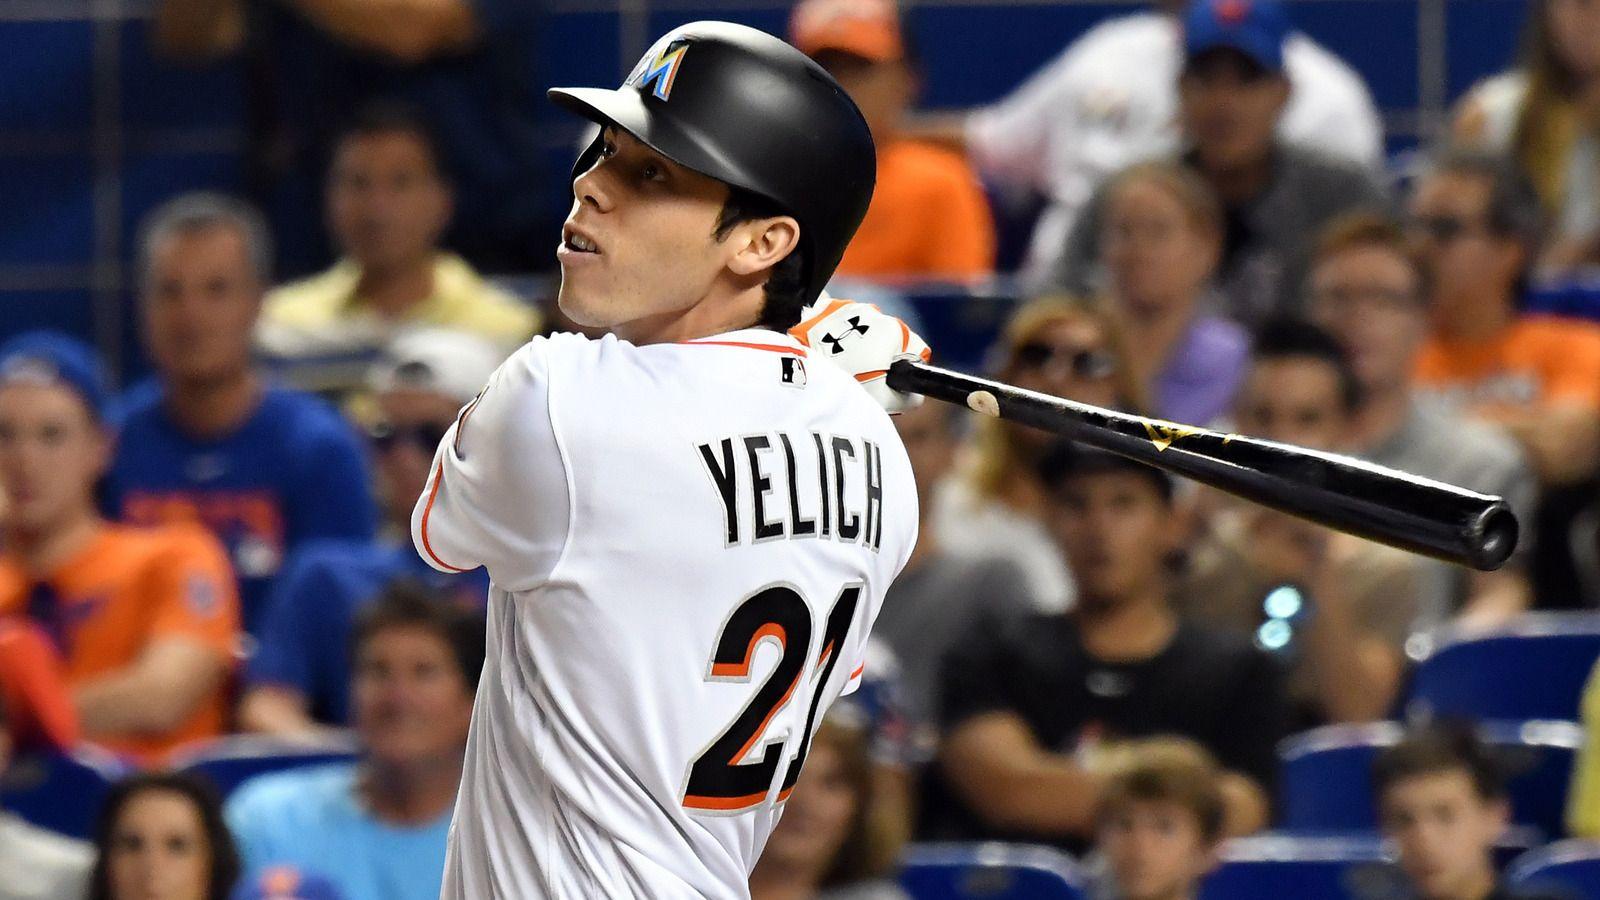 WATCH: Marlins' Christian Yelich makes amazing catch, crashes face